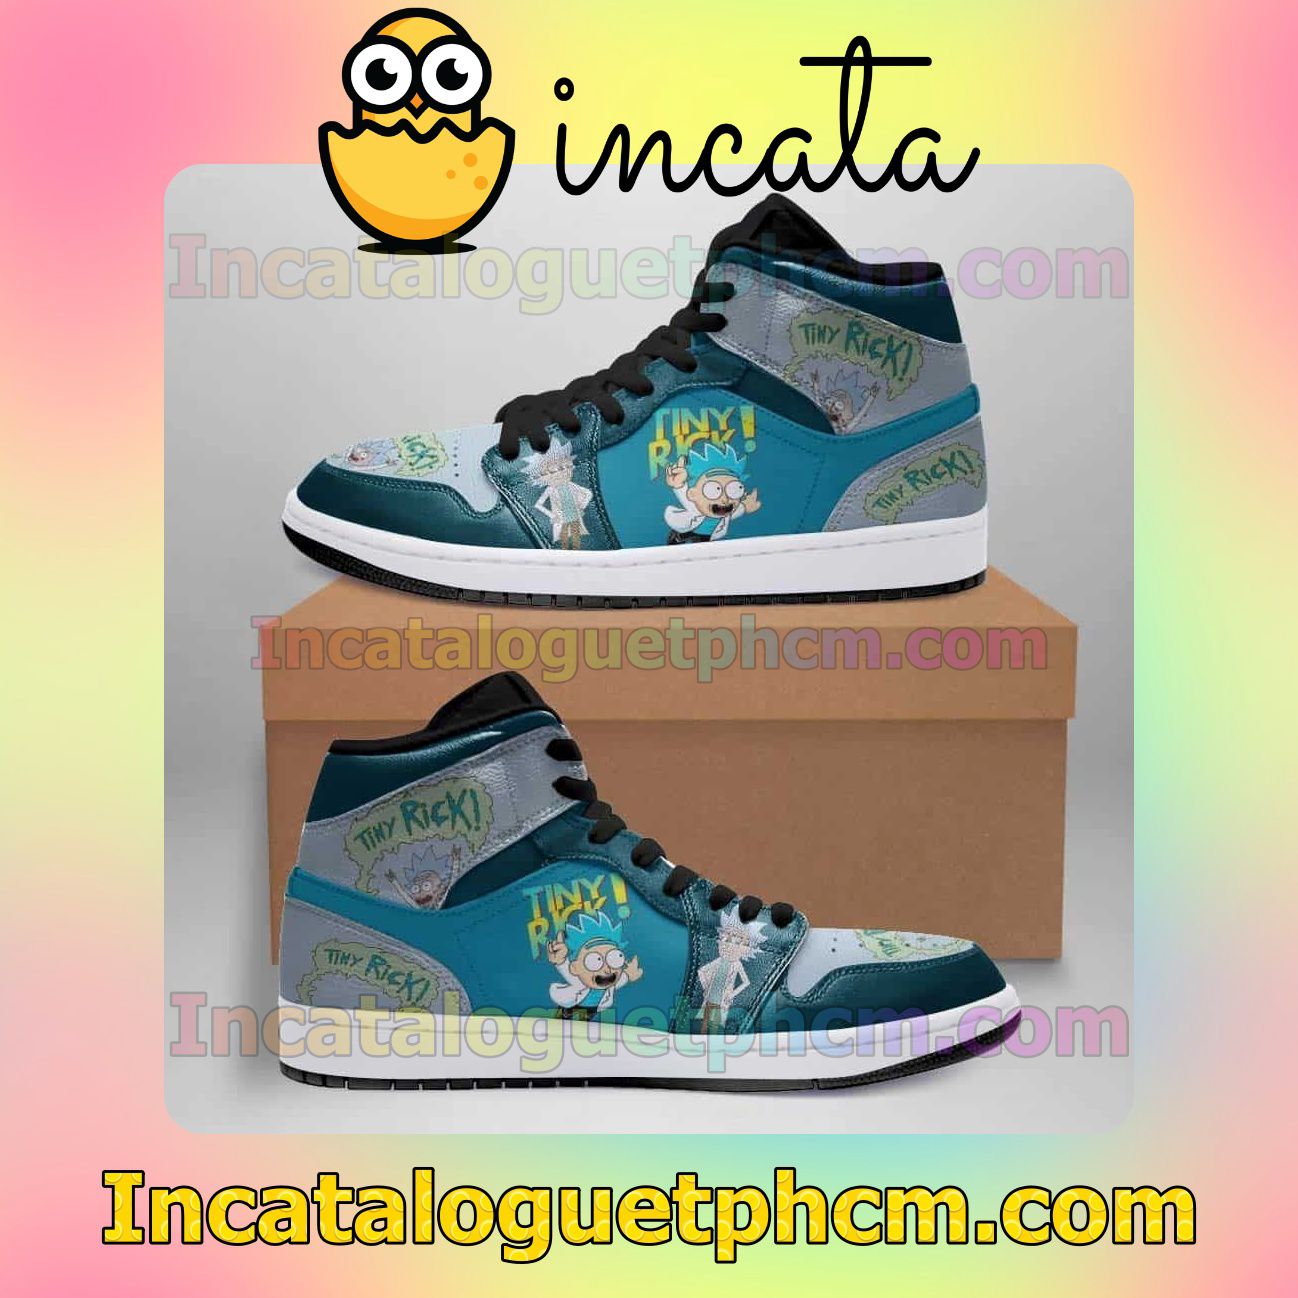 Us Store Tiny Rick And Morty 1s Air Jordan 1 Inspired Shoes